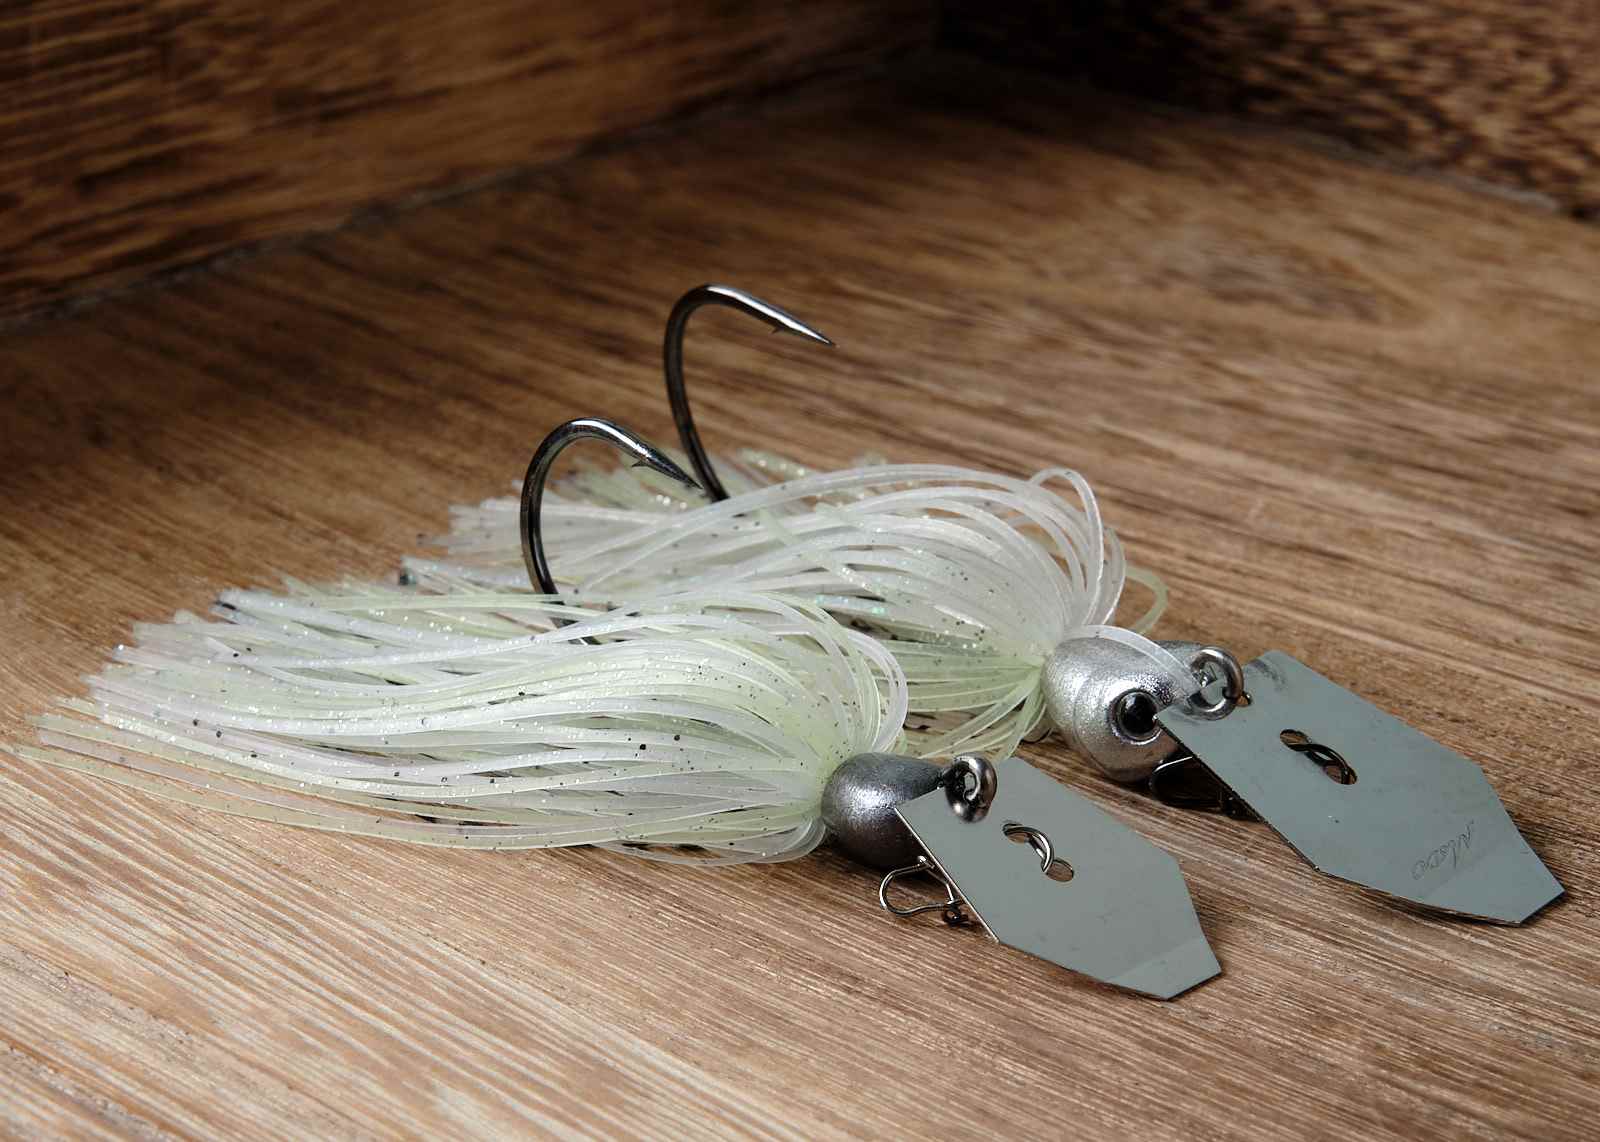 Why You Should Try Fishing a ChatterBait on Braided Fishing Line